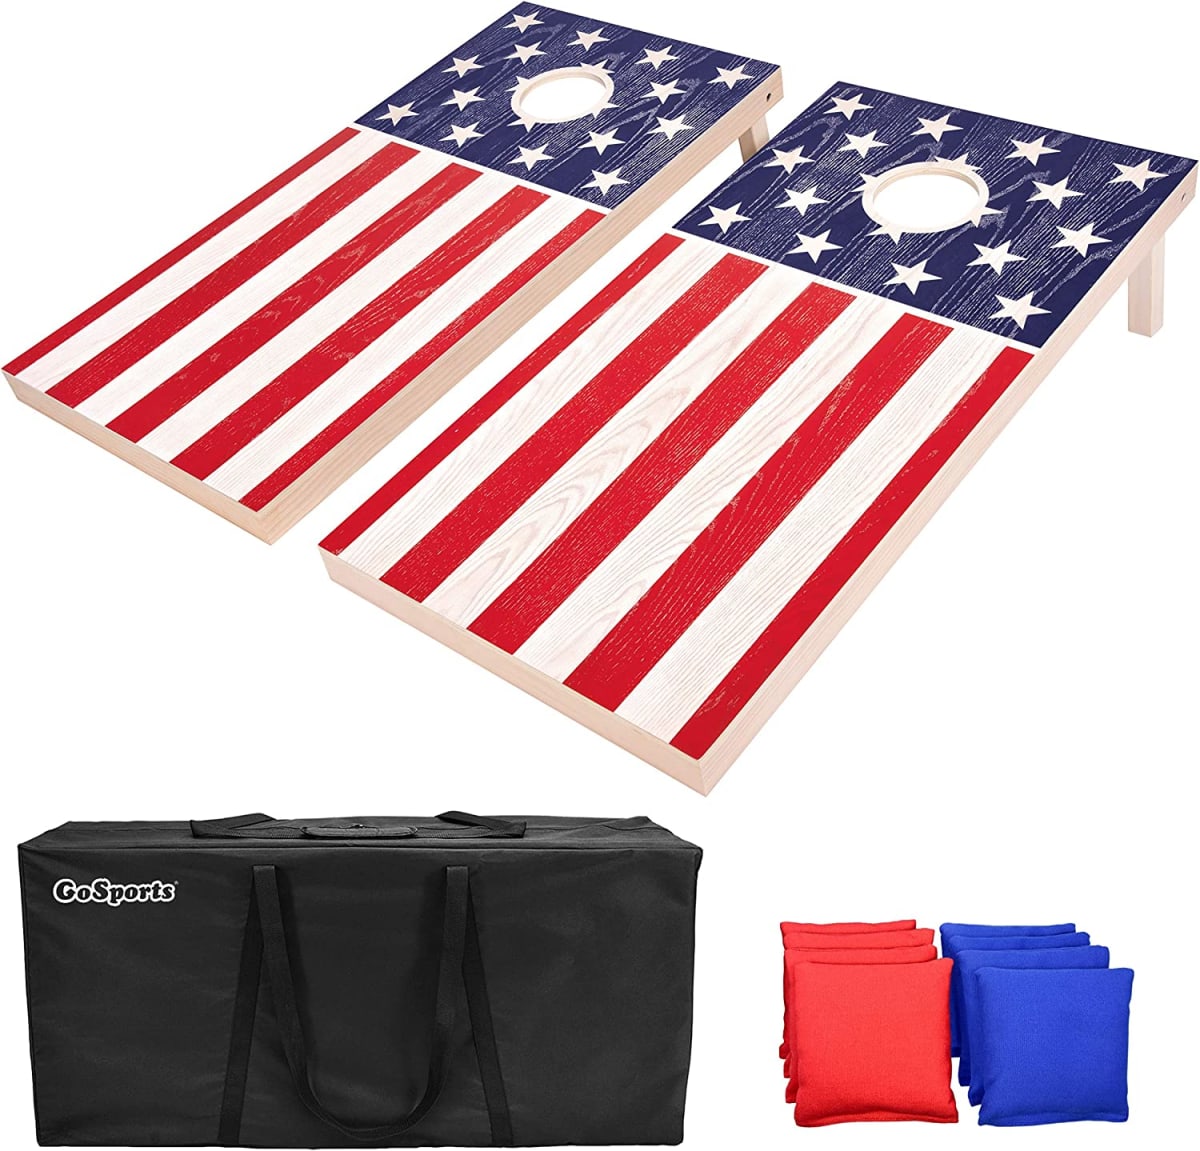 Flag Series Wood Cornhole Sets – Choose between American Flag and State Flags – Includes Two Regulation Size 4’ x 2’ Boards